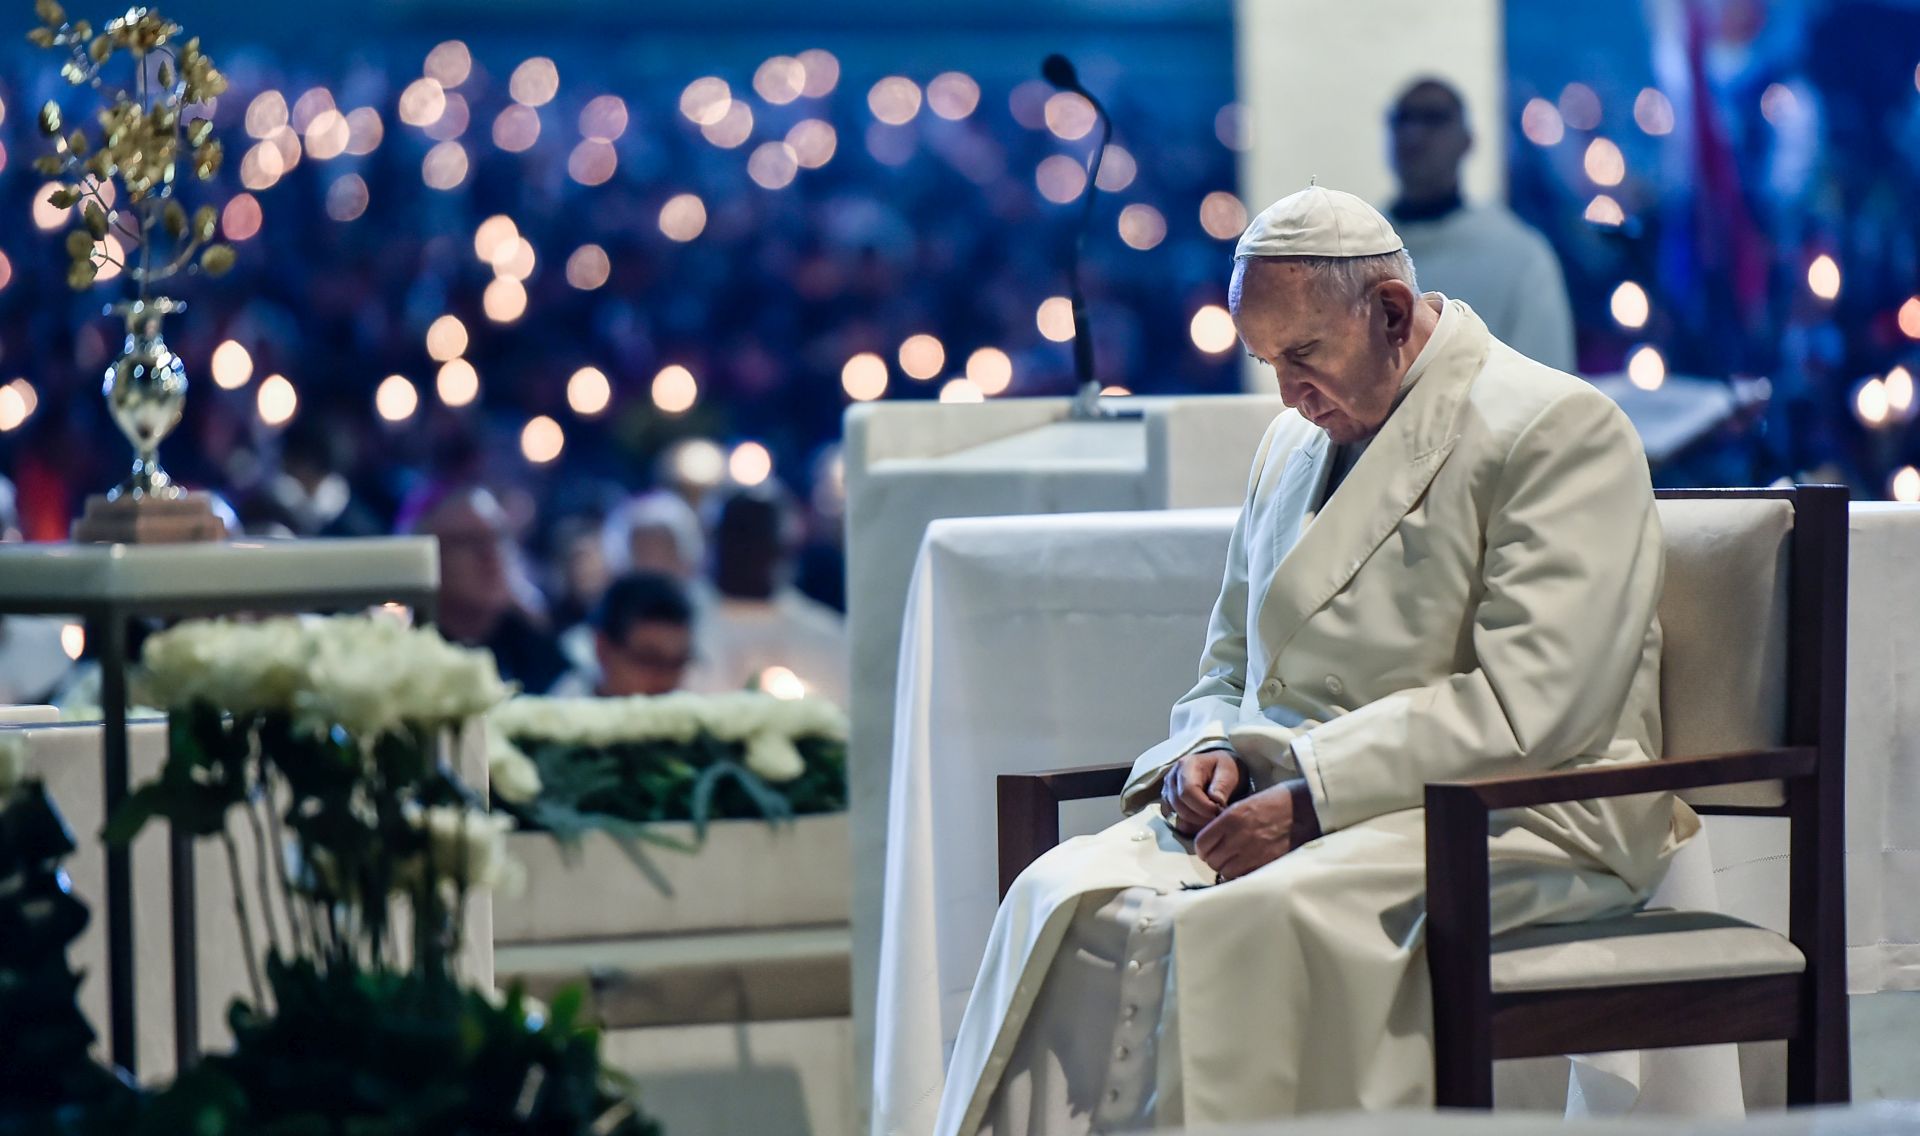 epa05960493 Pope Francis prays to Our Lady of Fatima at Apparitions Chapel before the traditional candle procession at Fatima's Sanctuary, Leiria, Portugal, 12 May 2017. Pope Francis is in visiting Fatima on 12 and 13 May on the 100th anniversary of the appearances of Mary.  EPA/NUNO ANDRÉ FERREIRA